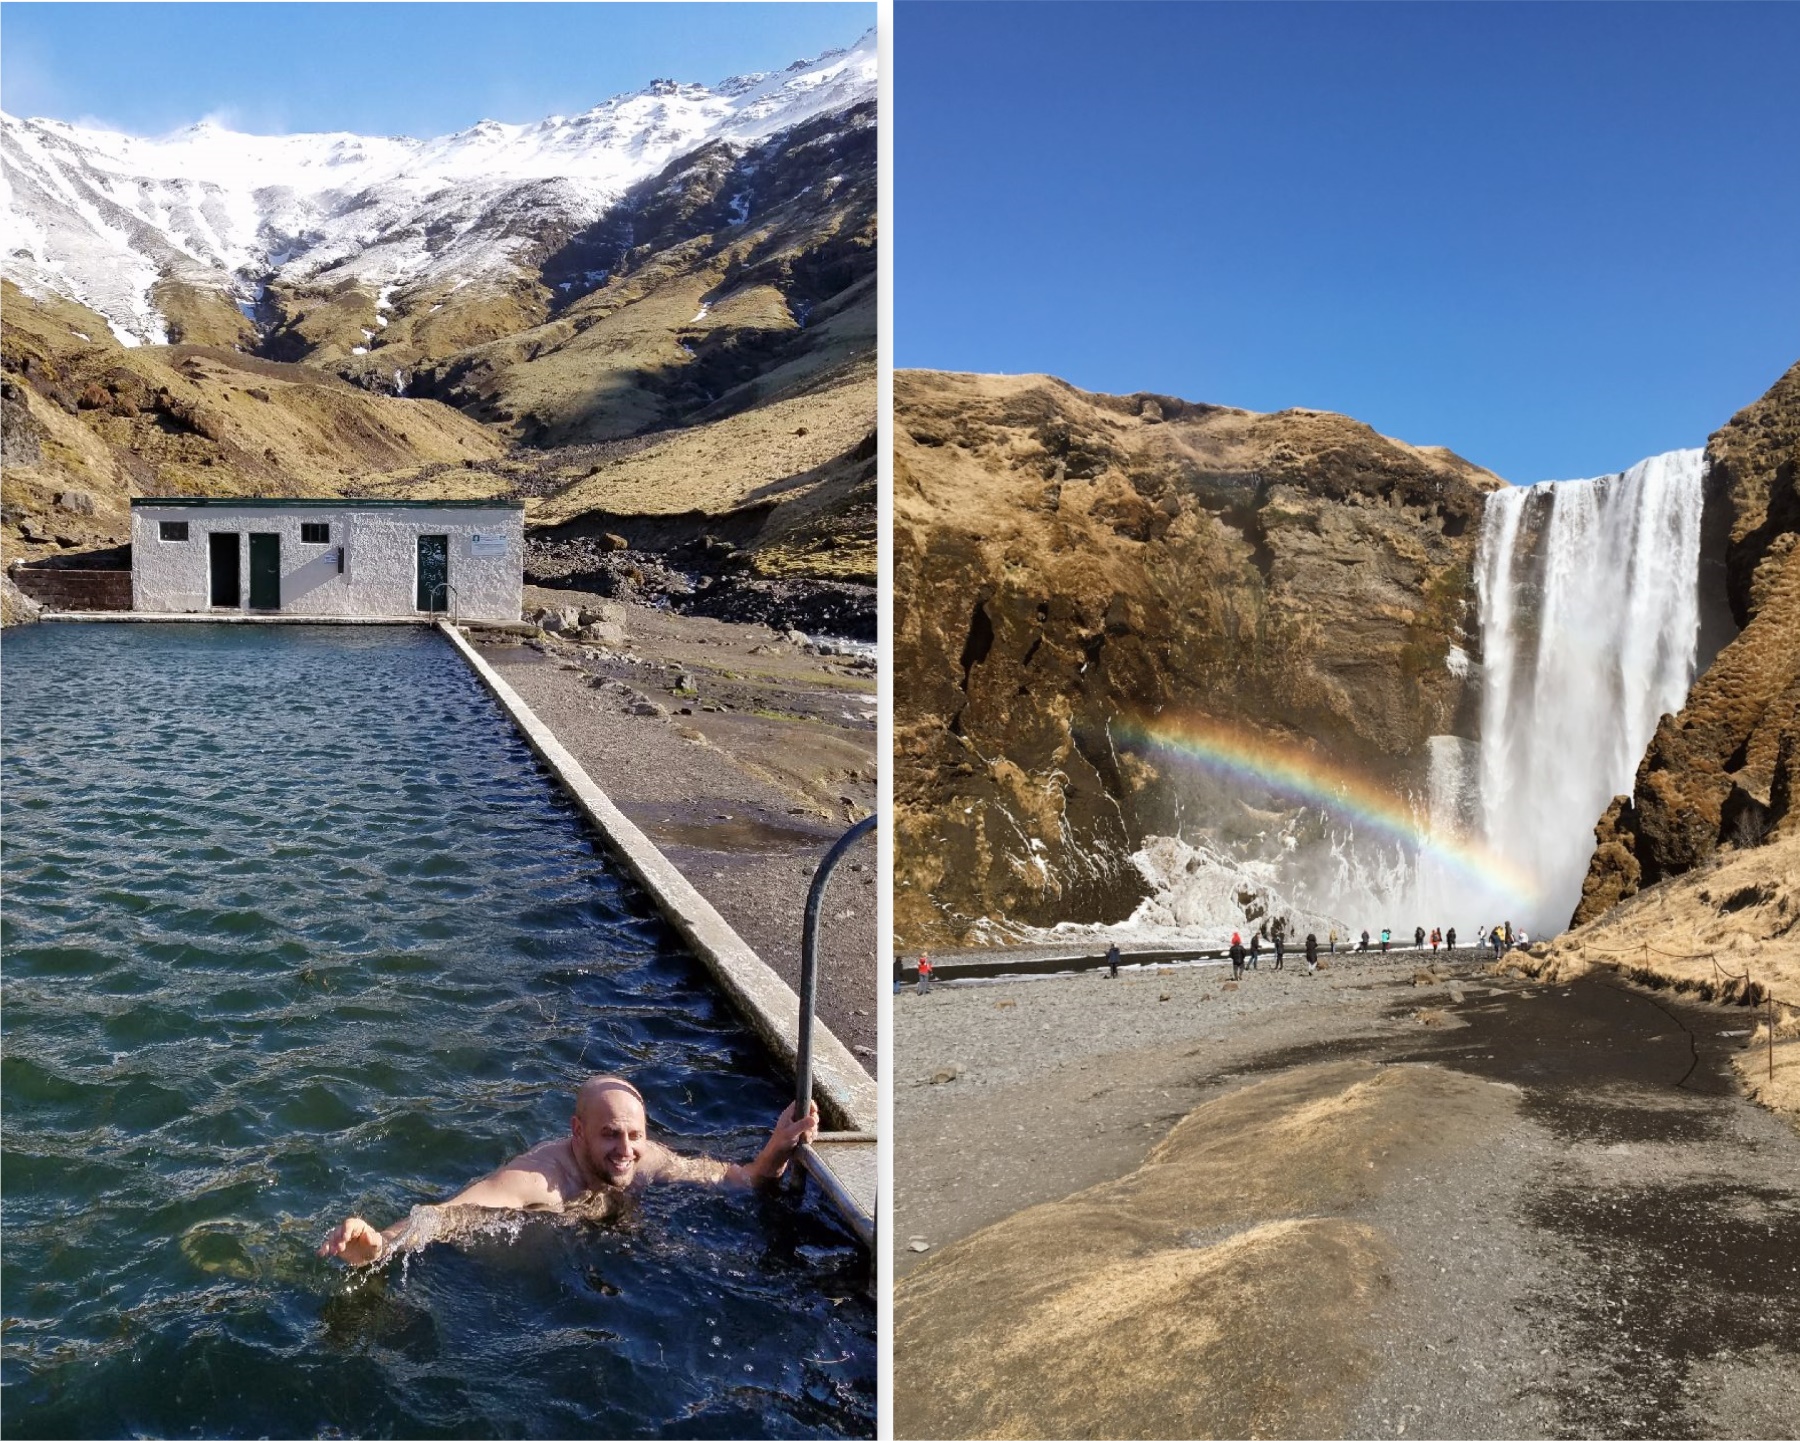 Seljavallalaug hot spring and Skógafoss Waterfall in Iceland